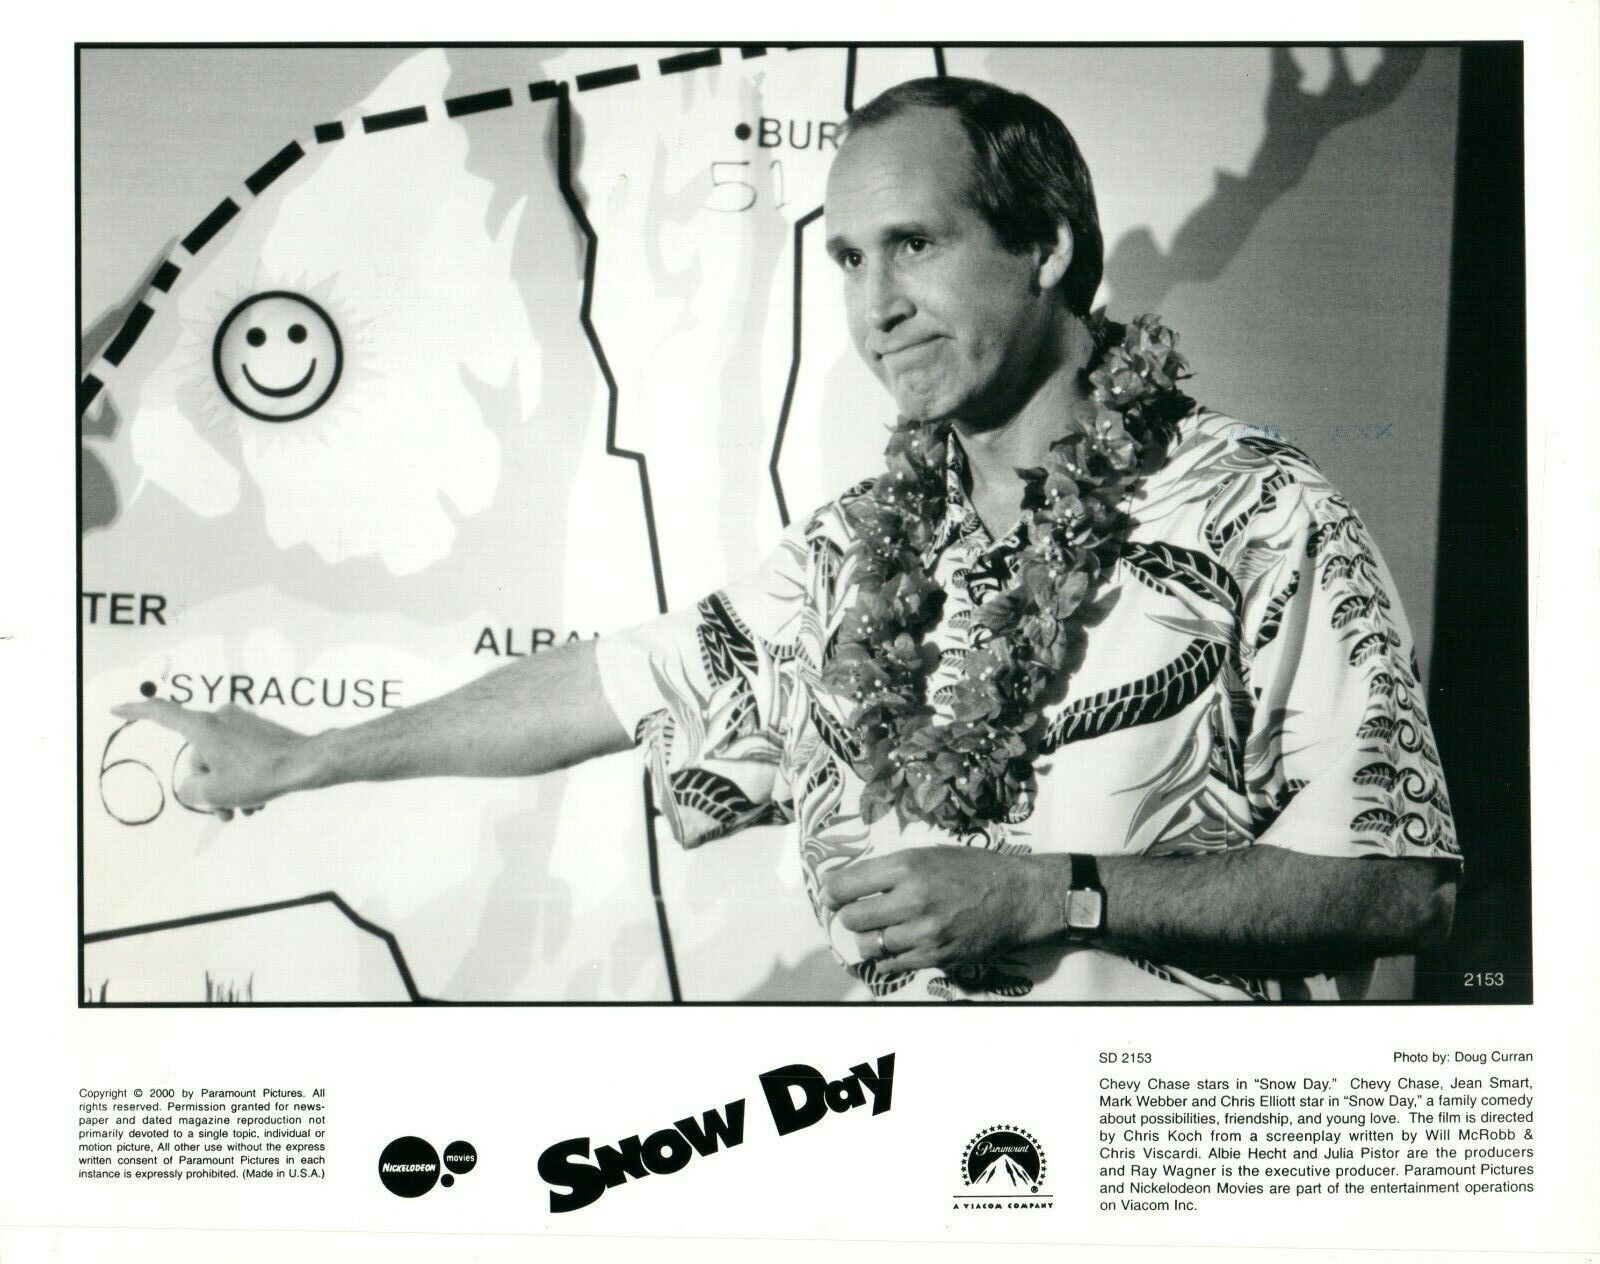 CHEVY CHASE Actor Comedian 8x10 Promo Press Photo Poster painting SNOW DAY Movie 2000 PARAMOUNT